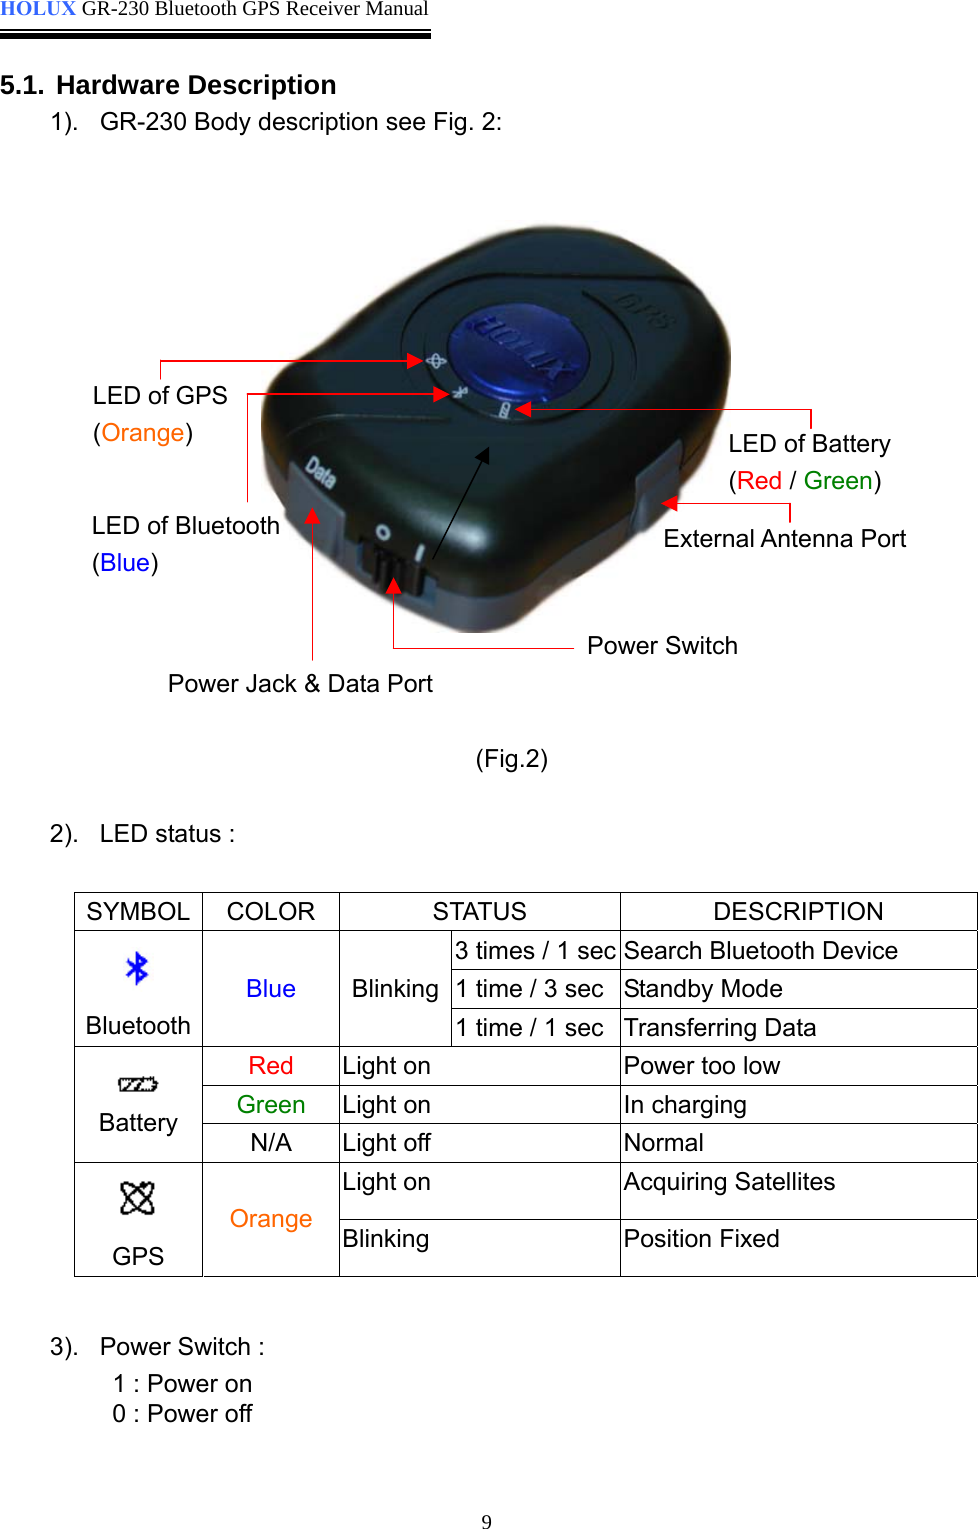  HOLUX GR-230 Bluetooth GPS Receiver Manual   9 5.1. Hardware Description 1).  GR-230 Body description see Fig. 2:                  (Fig.2)  External Antenna PortLED of Battery(Red / Green)LED of Bluetooth (Blue) LED of GPS(Orange) Power Switch Power Jack &amp; Data Port 2).  LED status :     SYMBOL COLOR  STATUS  DESCRIPTION 3 times / 1 sec Search Bluetooth Device 1 time / 3 sec Standby Mode  Bluetooth Blue  Blinking1 time / 1 sec Transferring Data Red  Light on  Power too low Green  Light on  In charging  Battery  N/A Light off  Normal Light on  Acquiring Satellites    GPS Orange  Blinking Position Fixed            3).  Power Switch :          1 : Power on          0 : Power off    